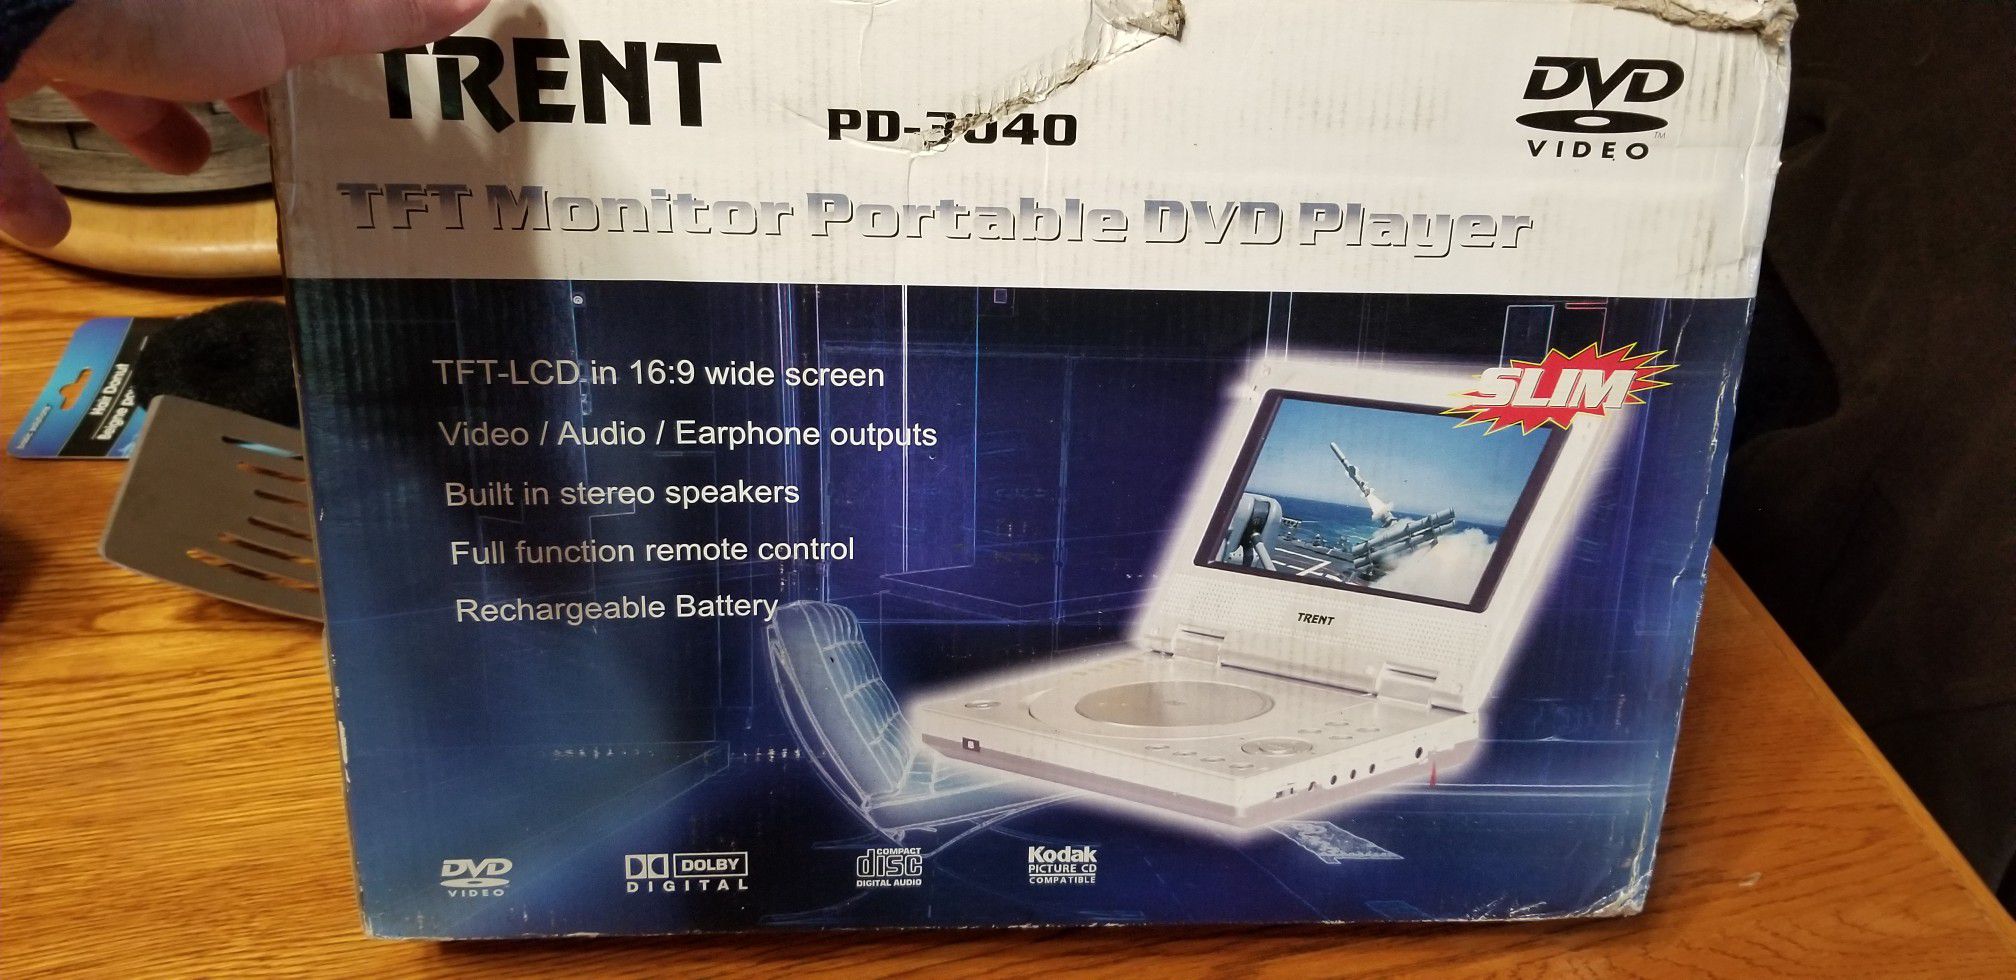 New portable DVD player